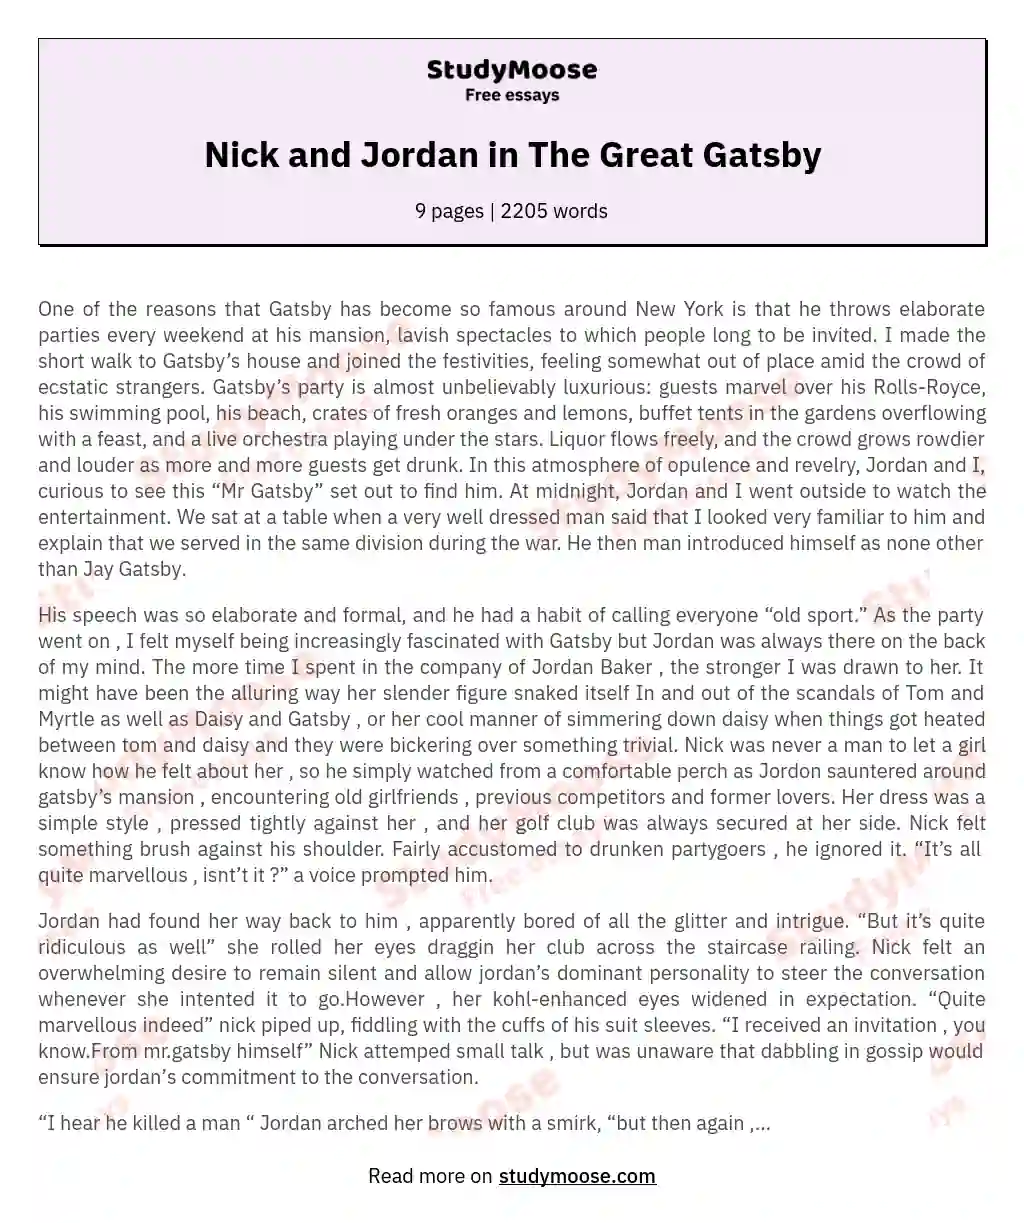 Nick and Jordan in The Great Gatsby